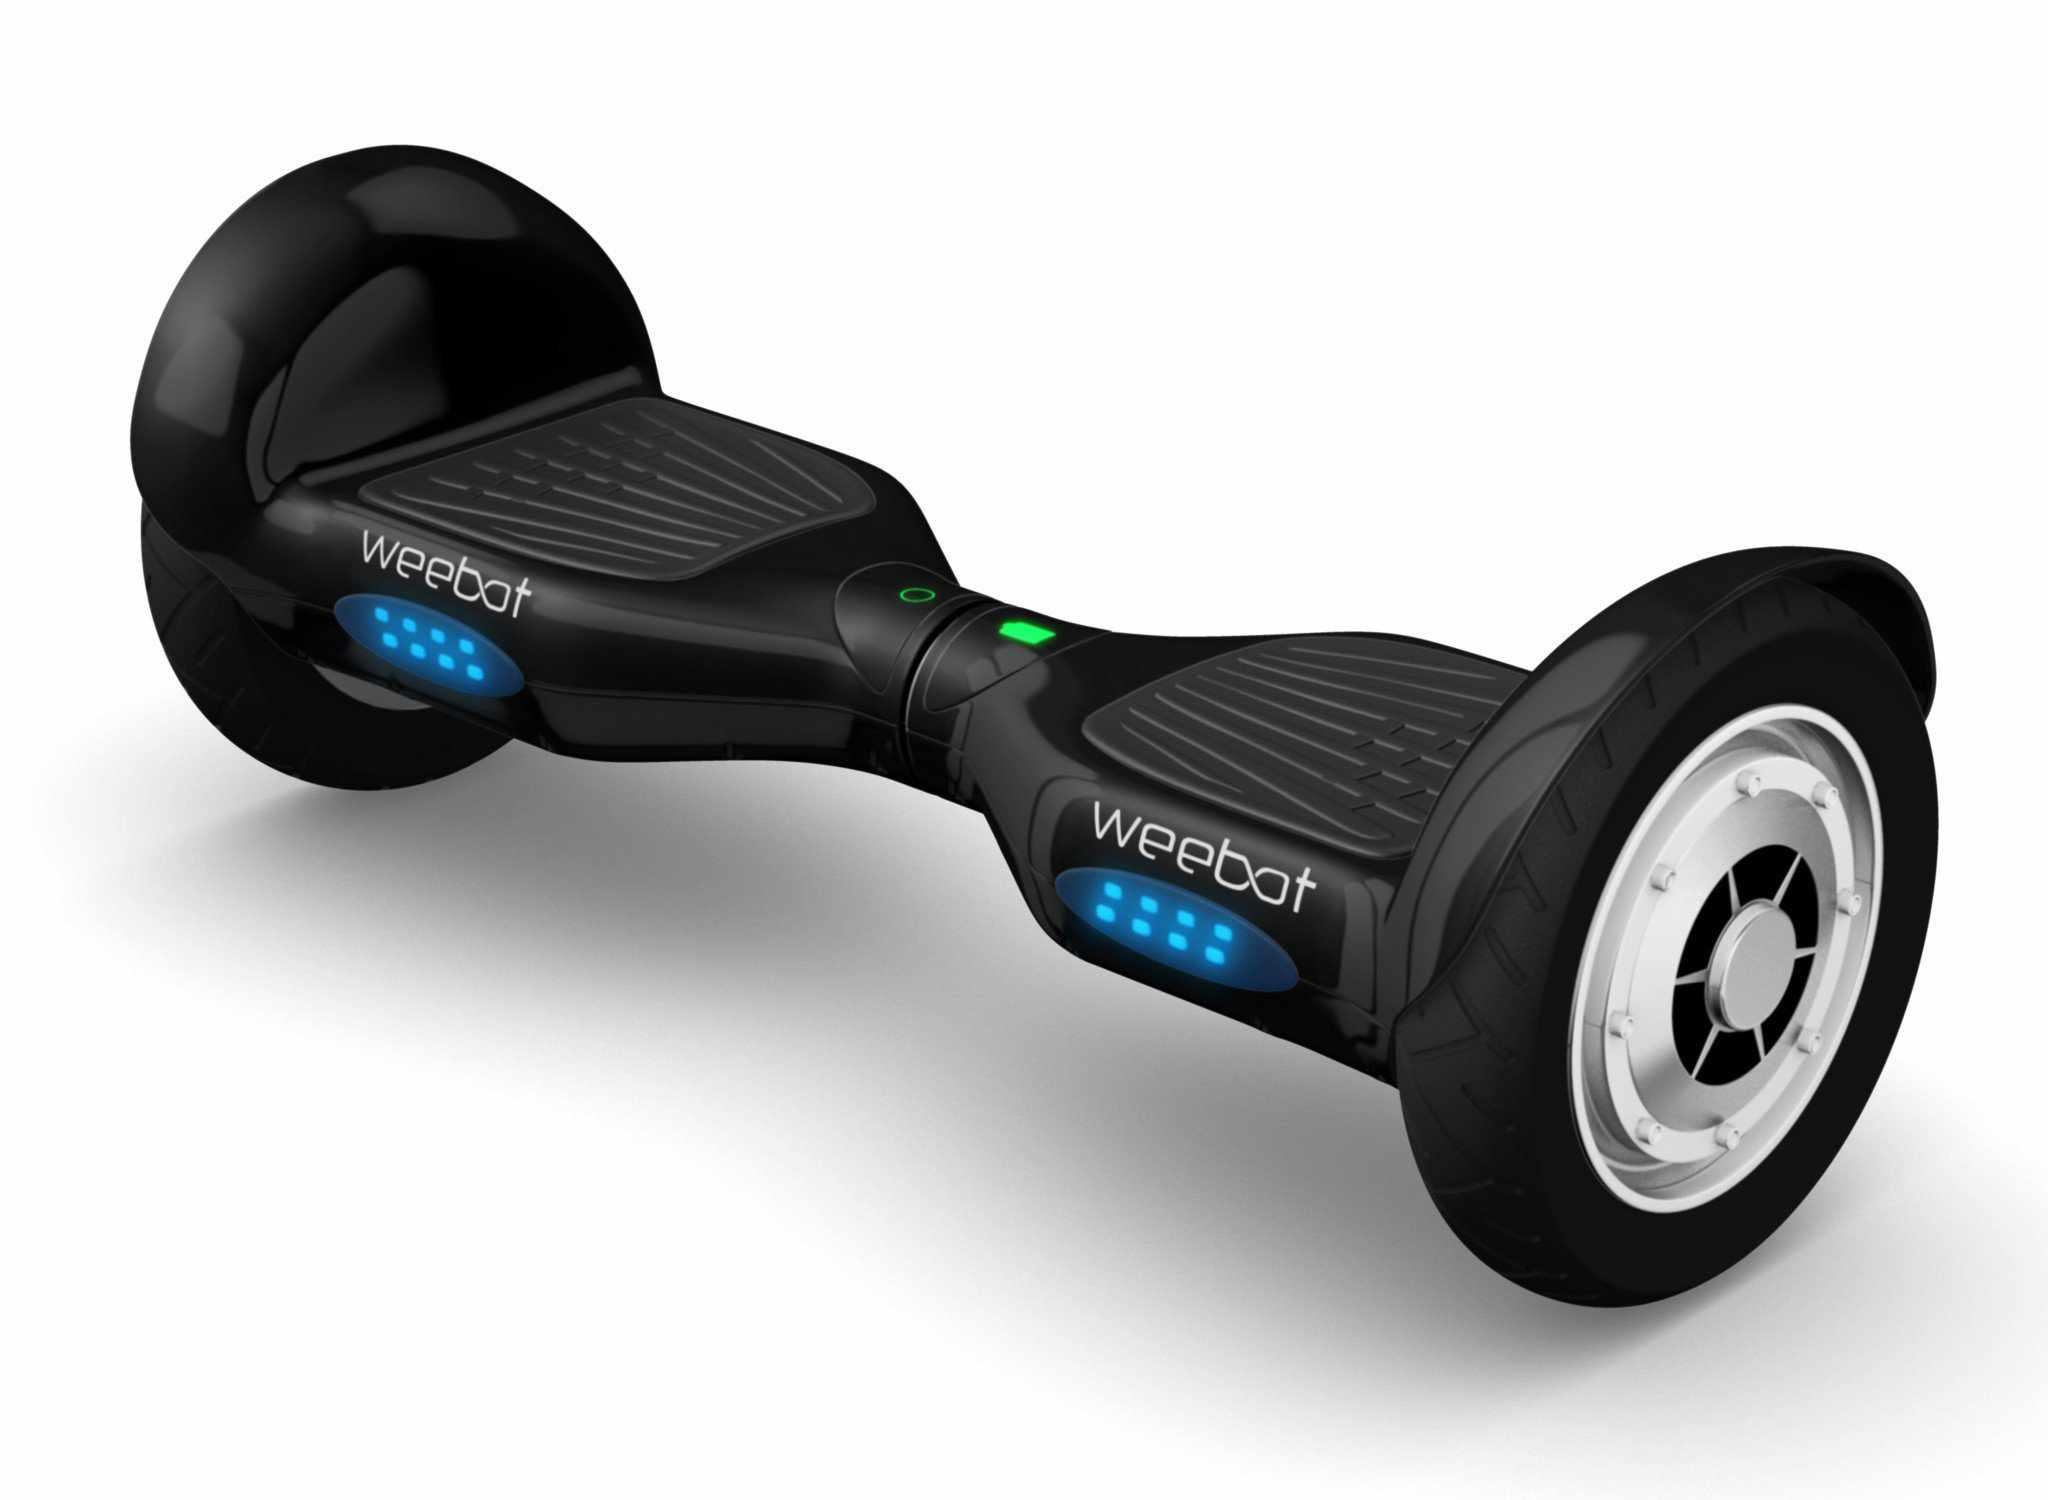 Hoverboard 4x4 Noir - 10 Pouces - Weebot